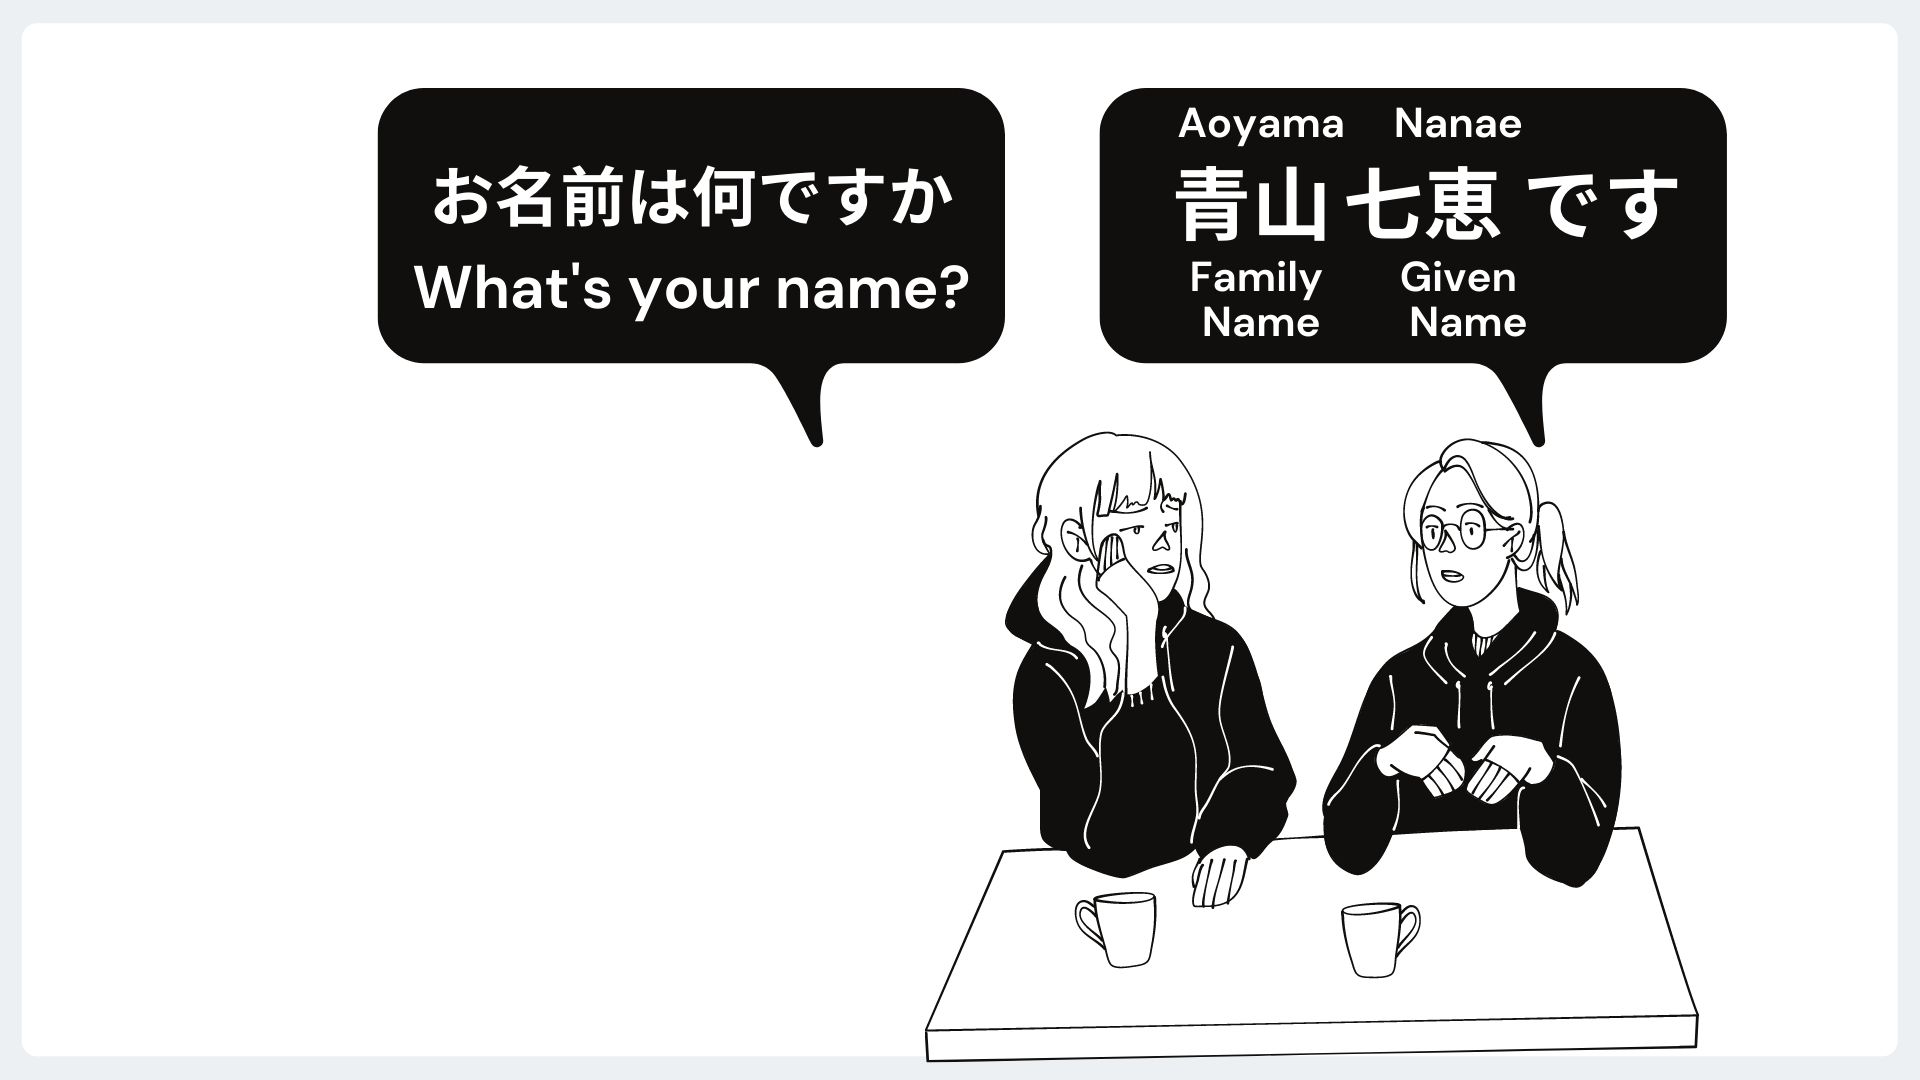 Why do Japanese say last name first?